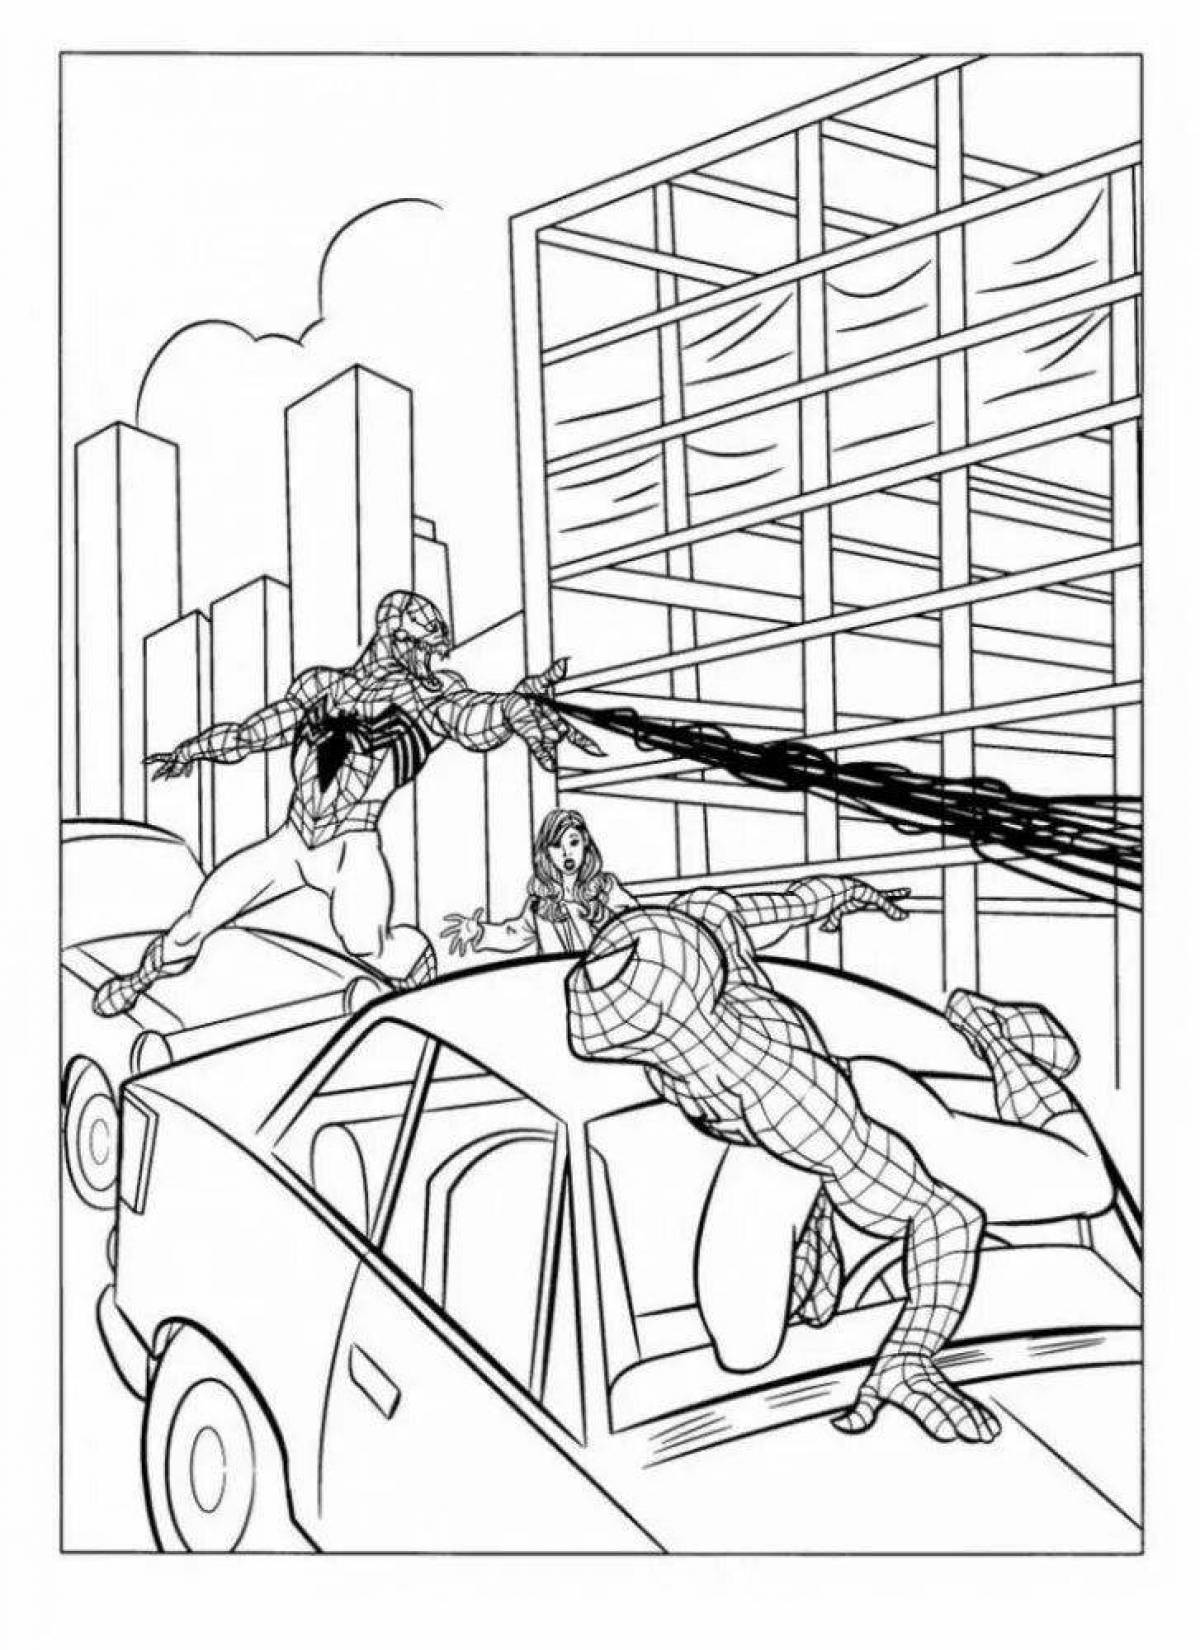 Spider-Man playful car coloring page